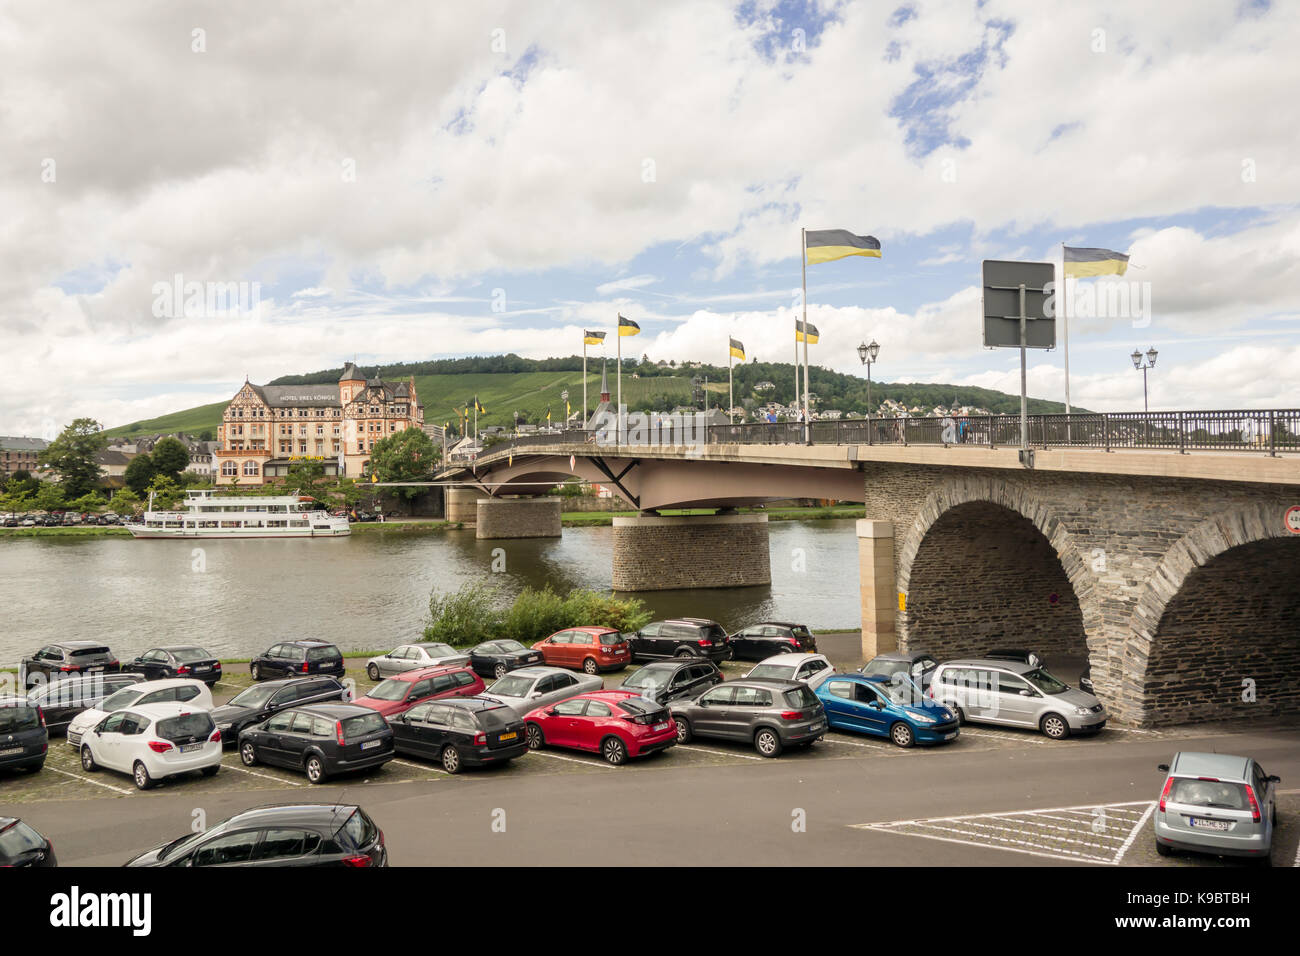 BERNKASTEL-KEUS, GERMANY - 5TH Aug 17:  A motorway bridge L47 that crosses over the Moselle river between the old and new town. Stock Photo